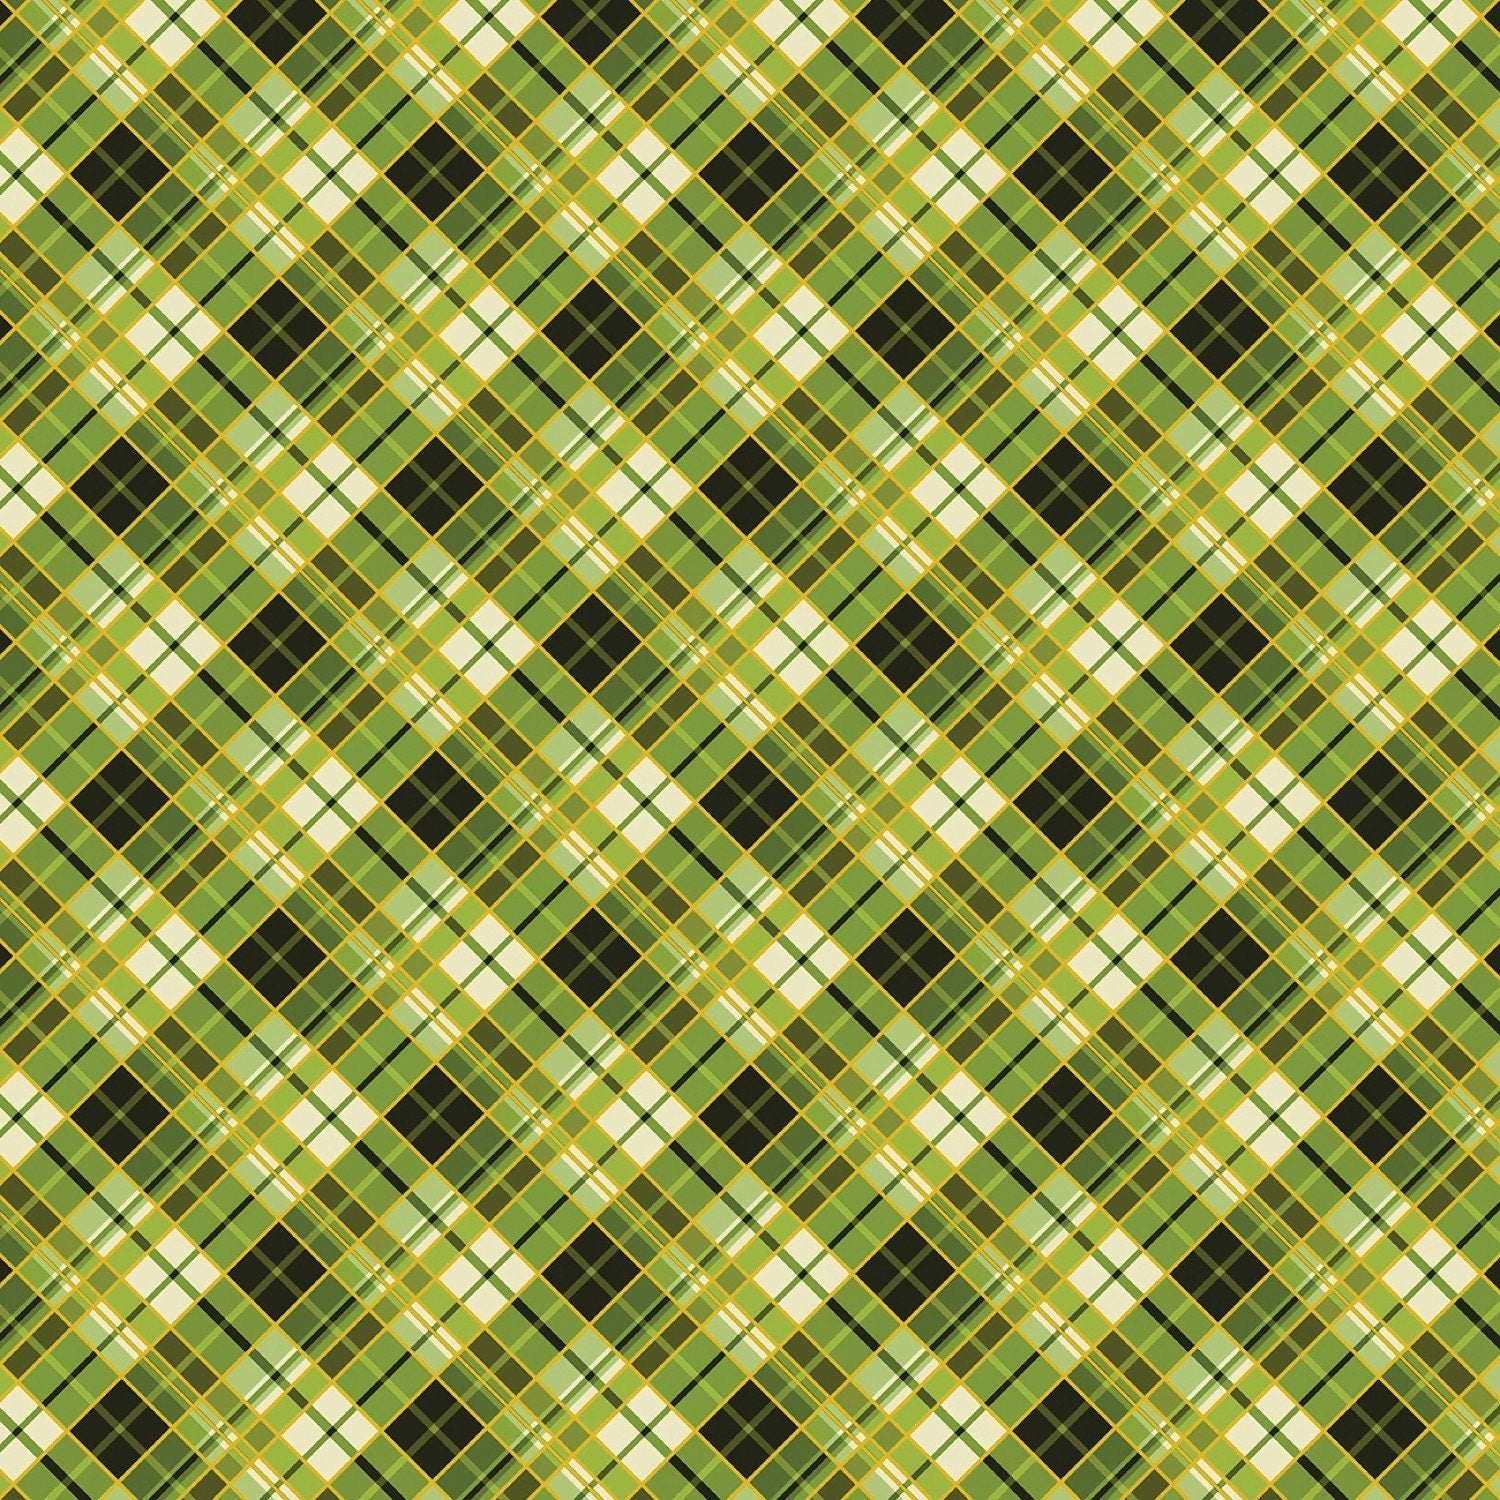 Autumn Plaid Green Fabric with Metallic Accents - Harvest Festival by Benartex - 100% Cotton - Thanksgiving print material - SHIPS NEXT DAY